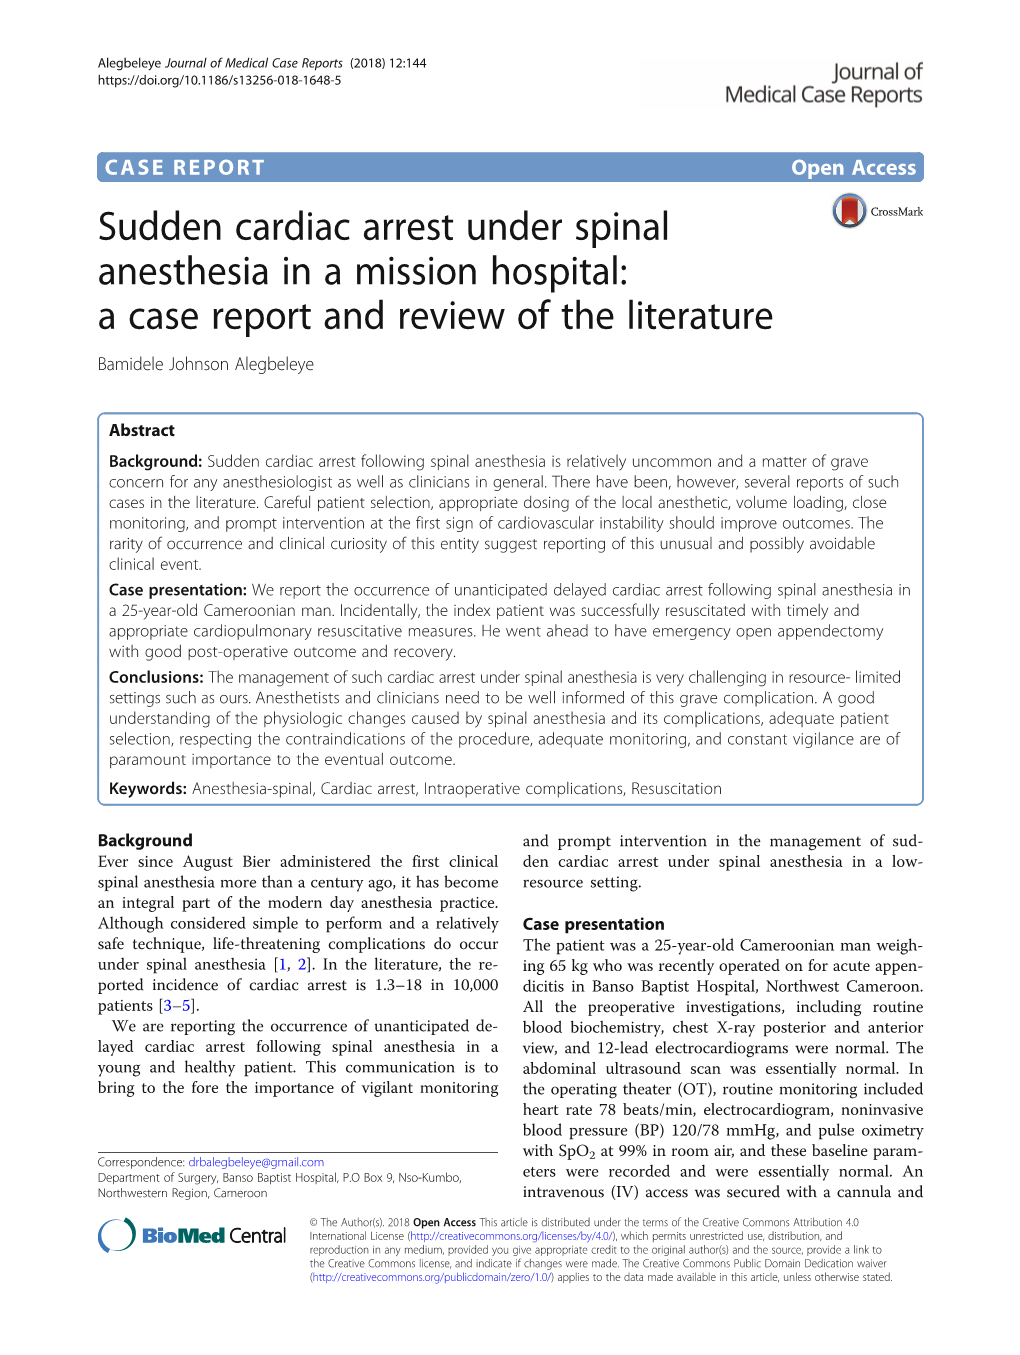 Sudden Cardiac Arrest Under Spinal Anesthesia in a Mission Hospital: a Case Report and Review of the Literature Bamidele Johnson Alegbeleye